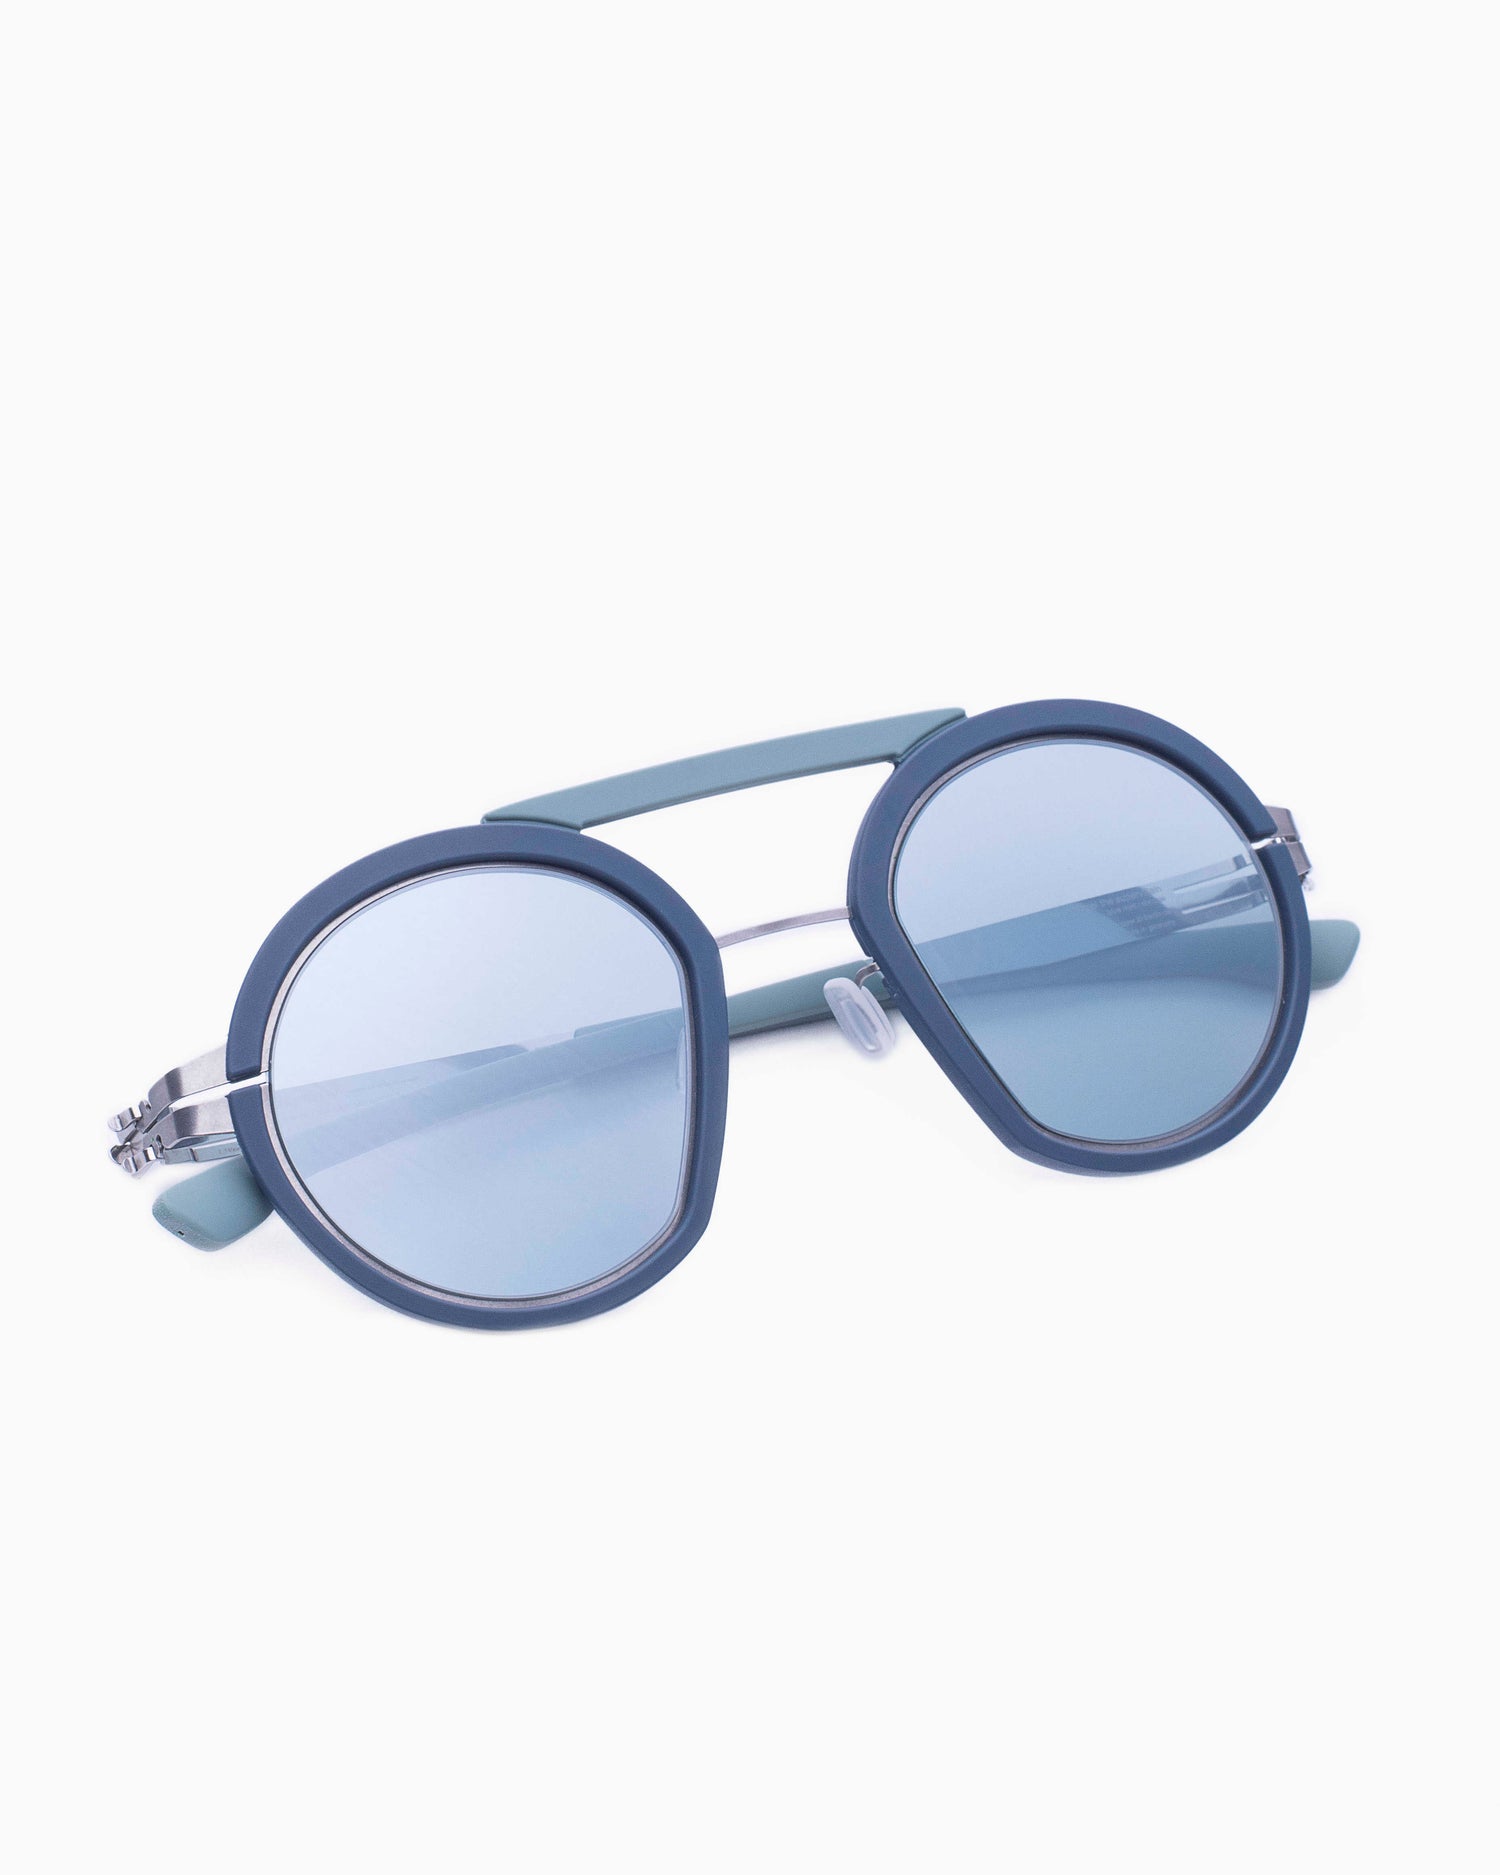 Ic Berlin - thesupervillain - chrome-blue-mint | glasses bar:  Marie-Sophie Dion